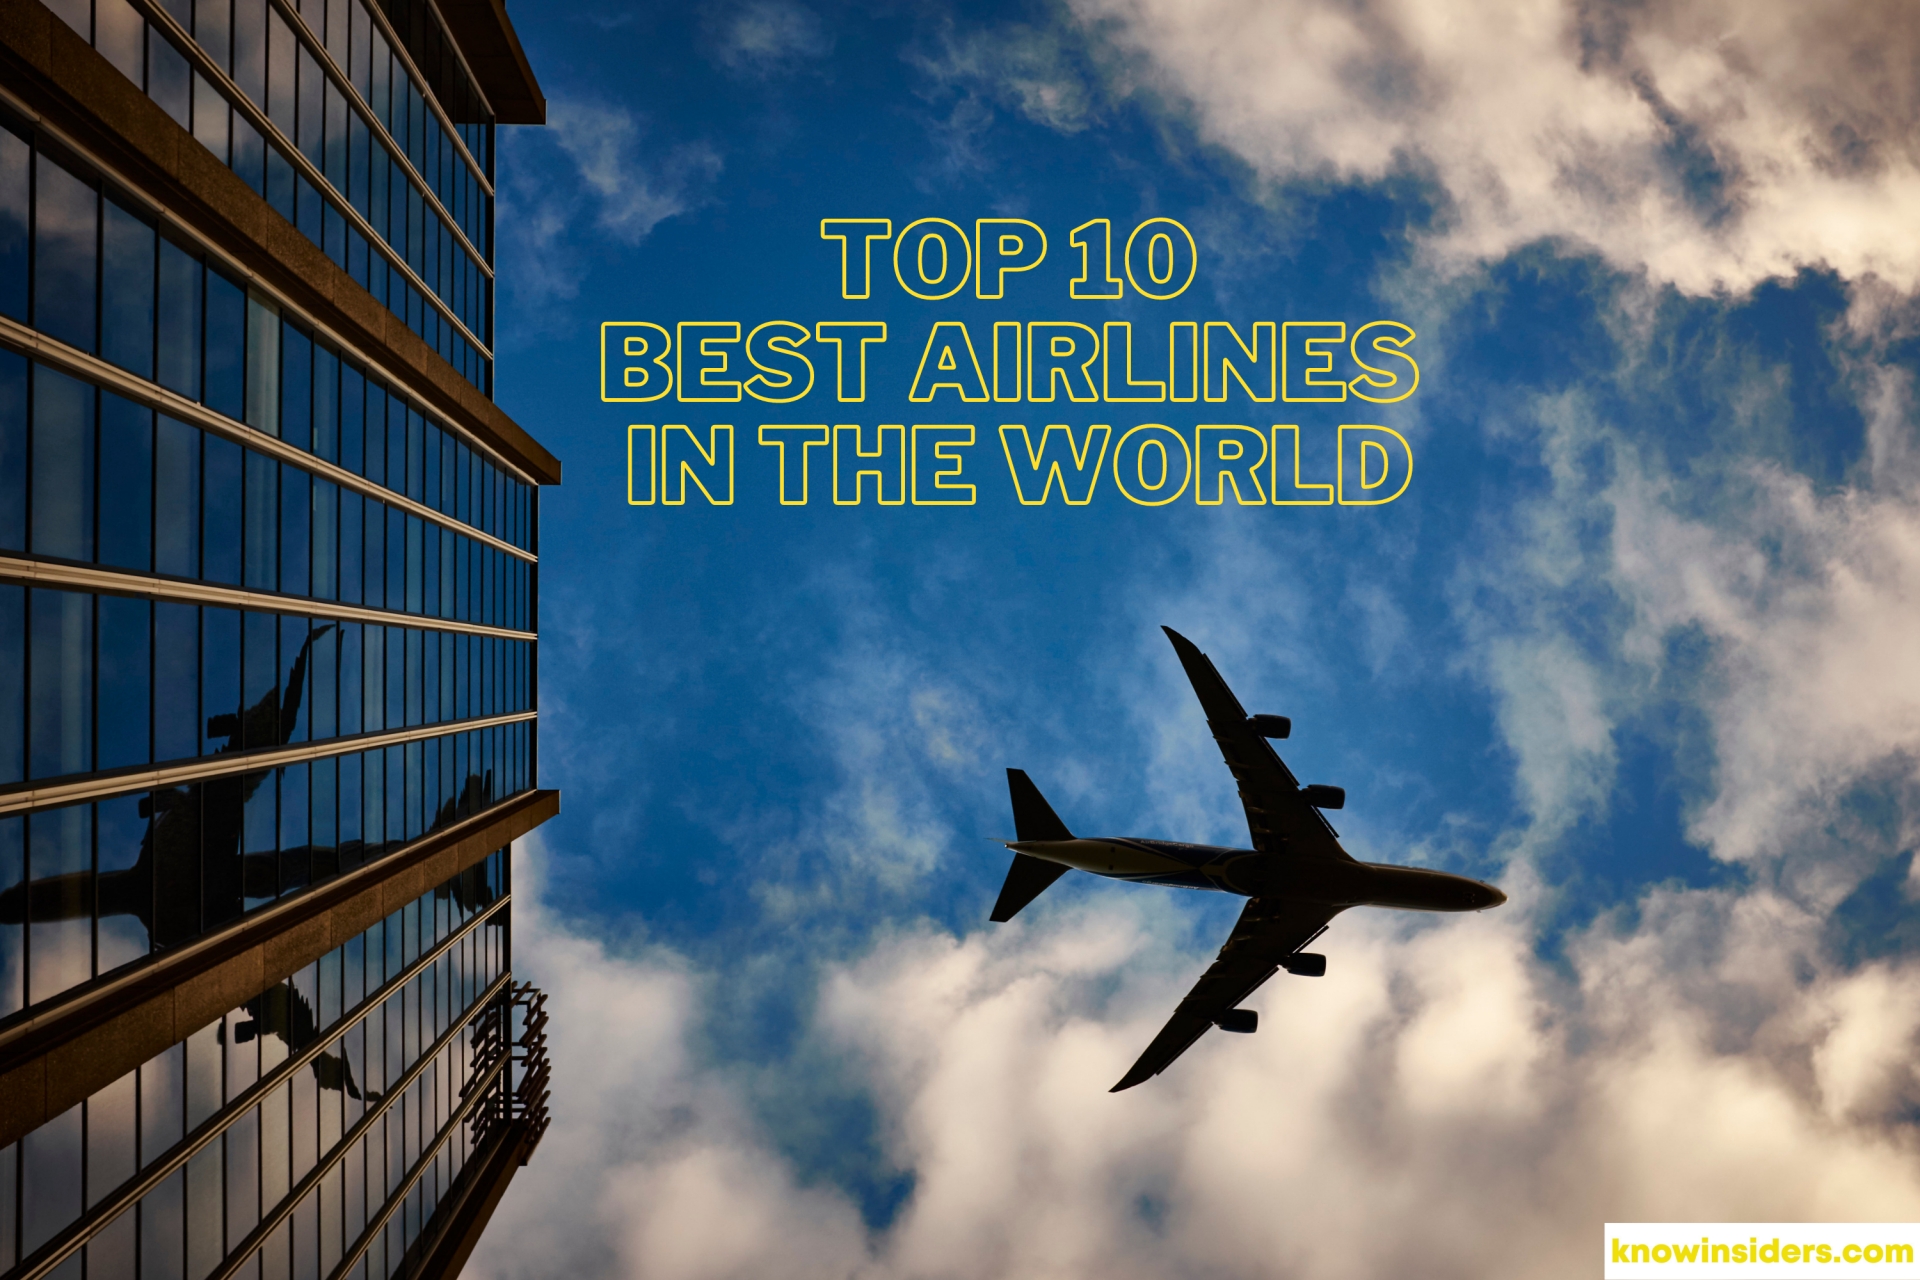 Top 10 Best Airlines In The World - Skytrax